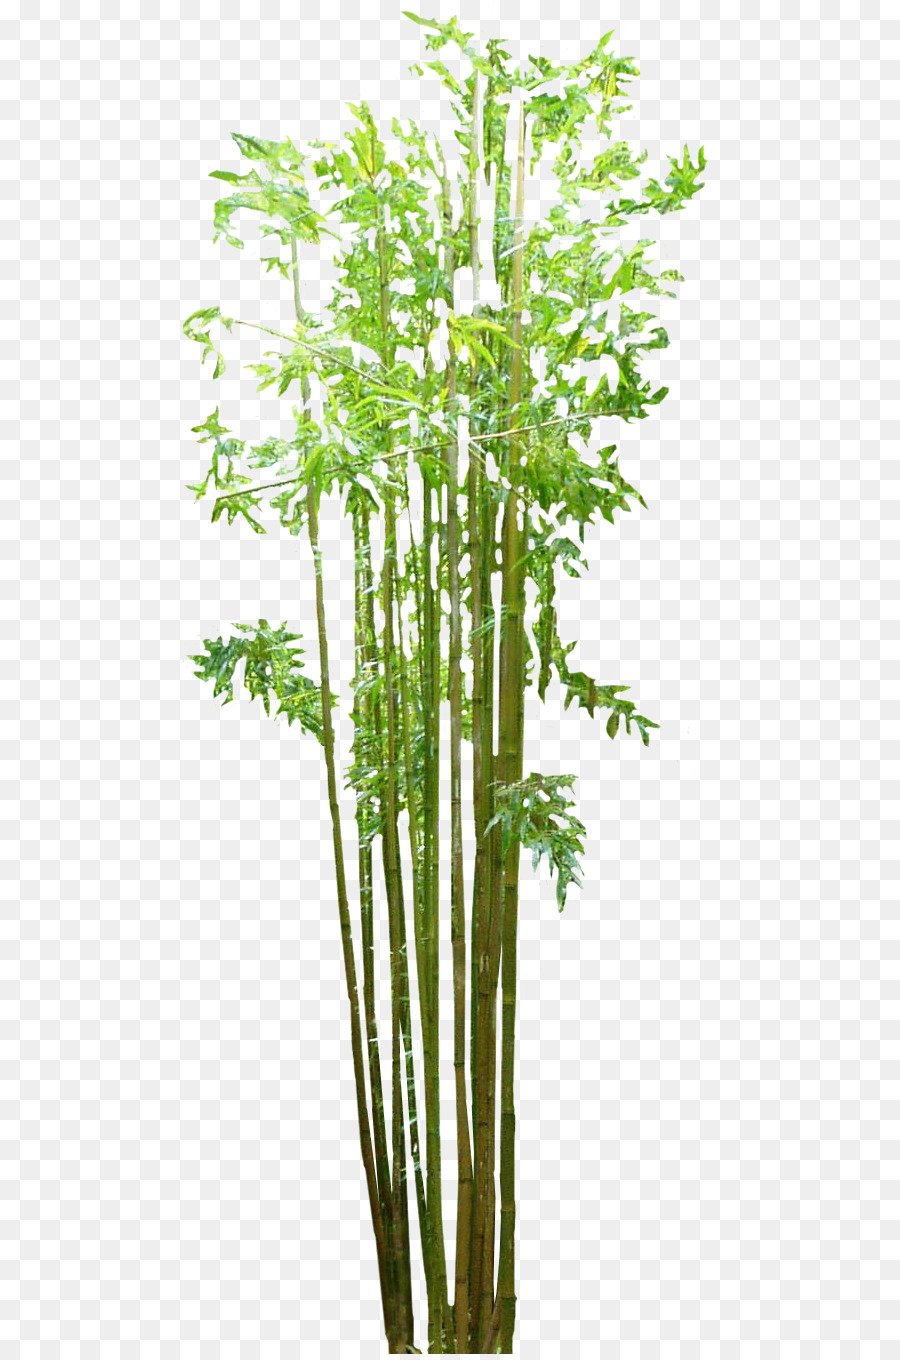 Bamboo Grasses Web browser - bamboo png download - 544*1354 - Free Transparent Bamboo png Download.